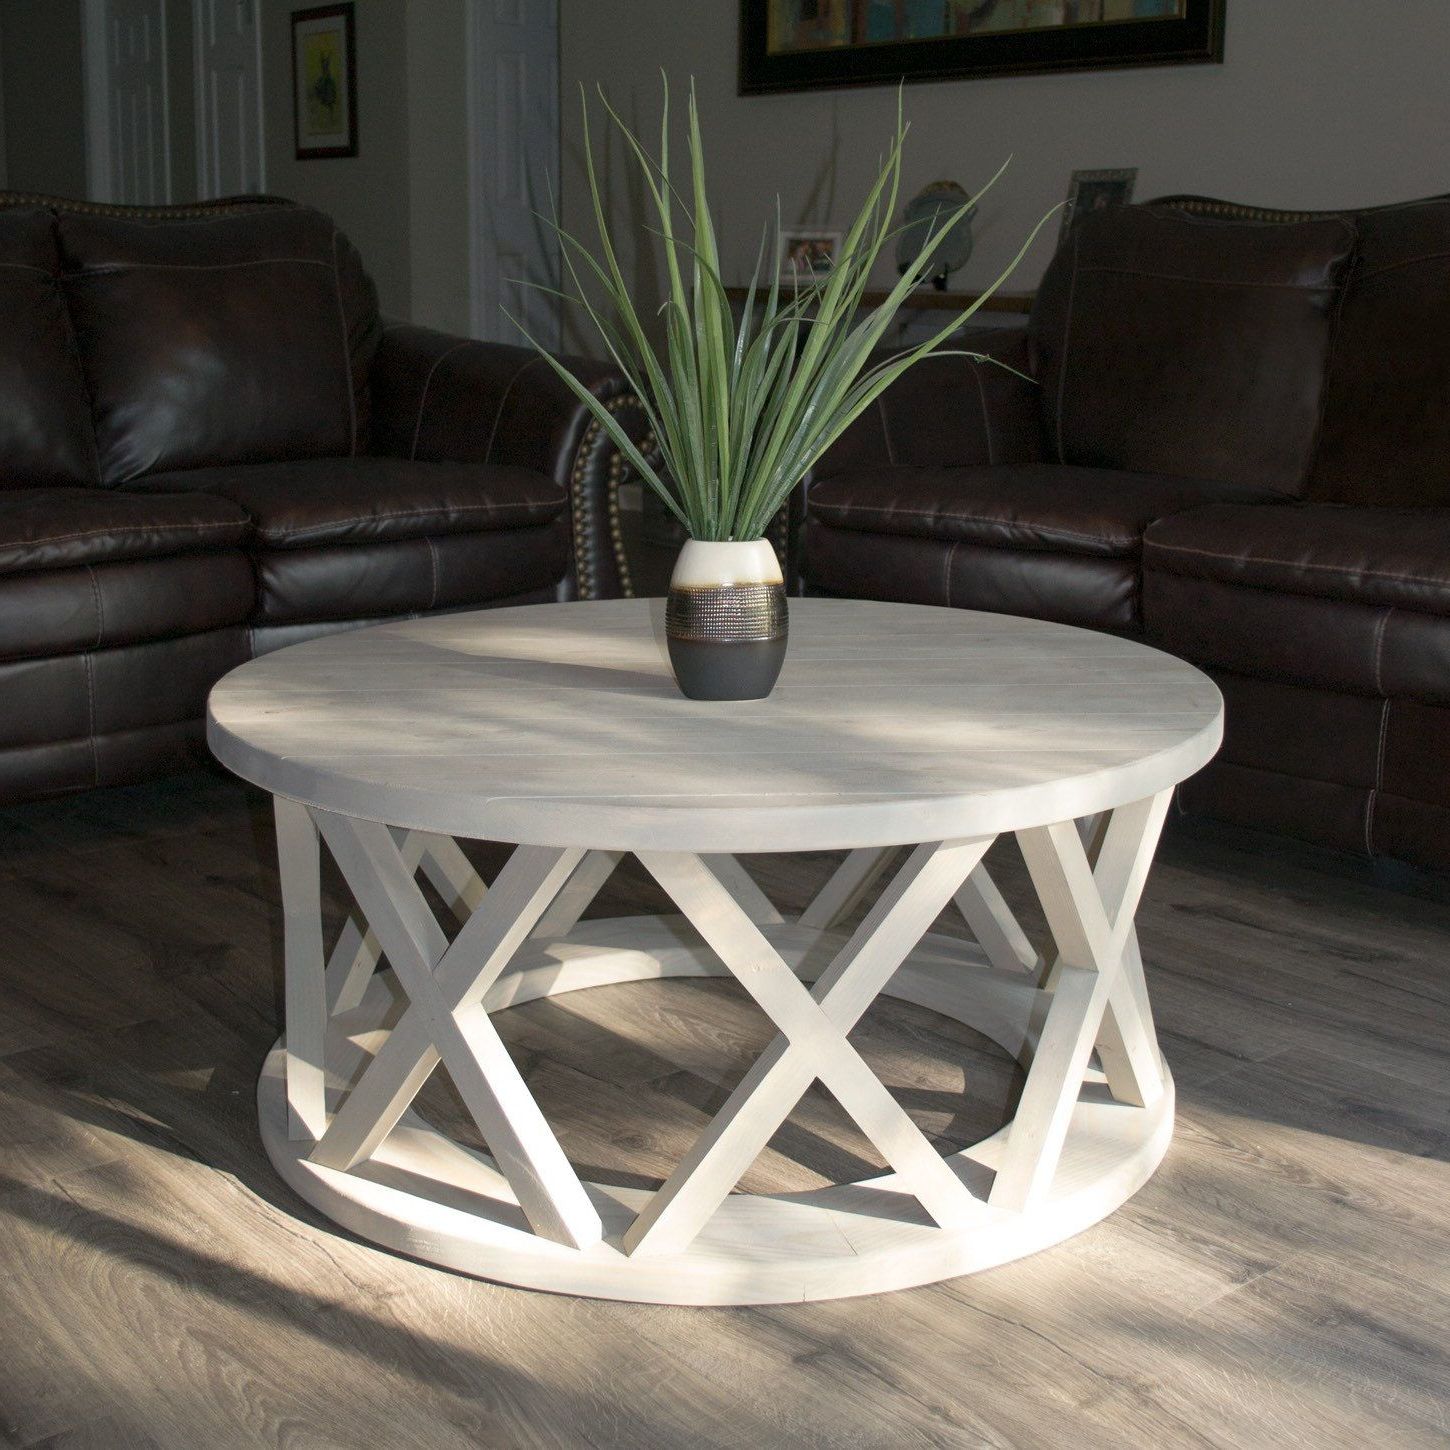 White T Base Seminar Coffee Tables Throughout Well Known Rustic Wood Coffee Table Round / Harper&bright Designs Industrial Big (View 13 of 15)